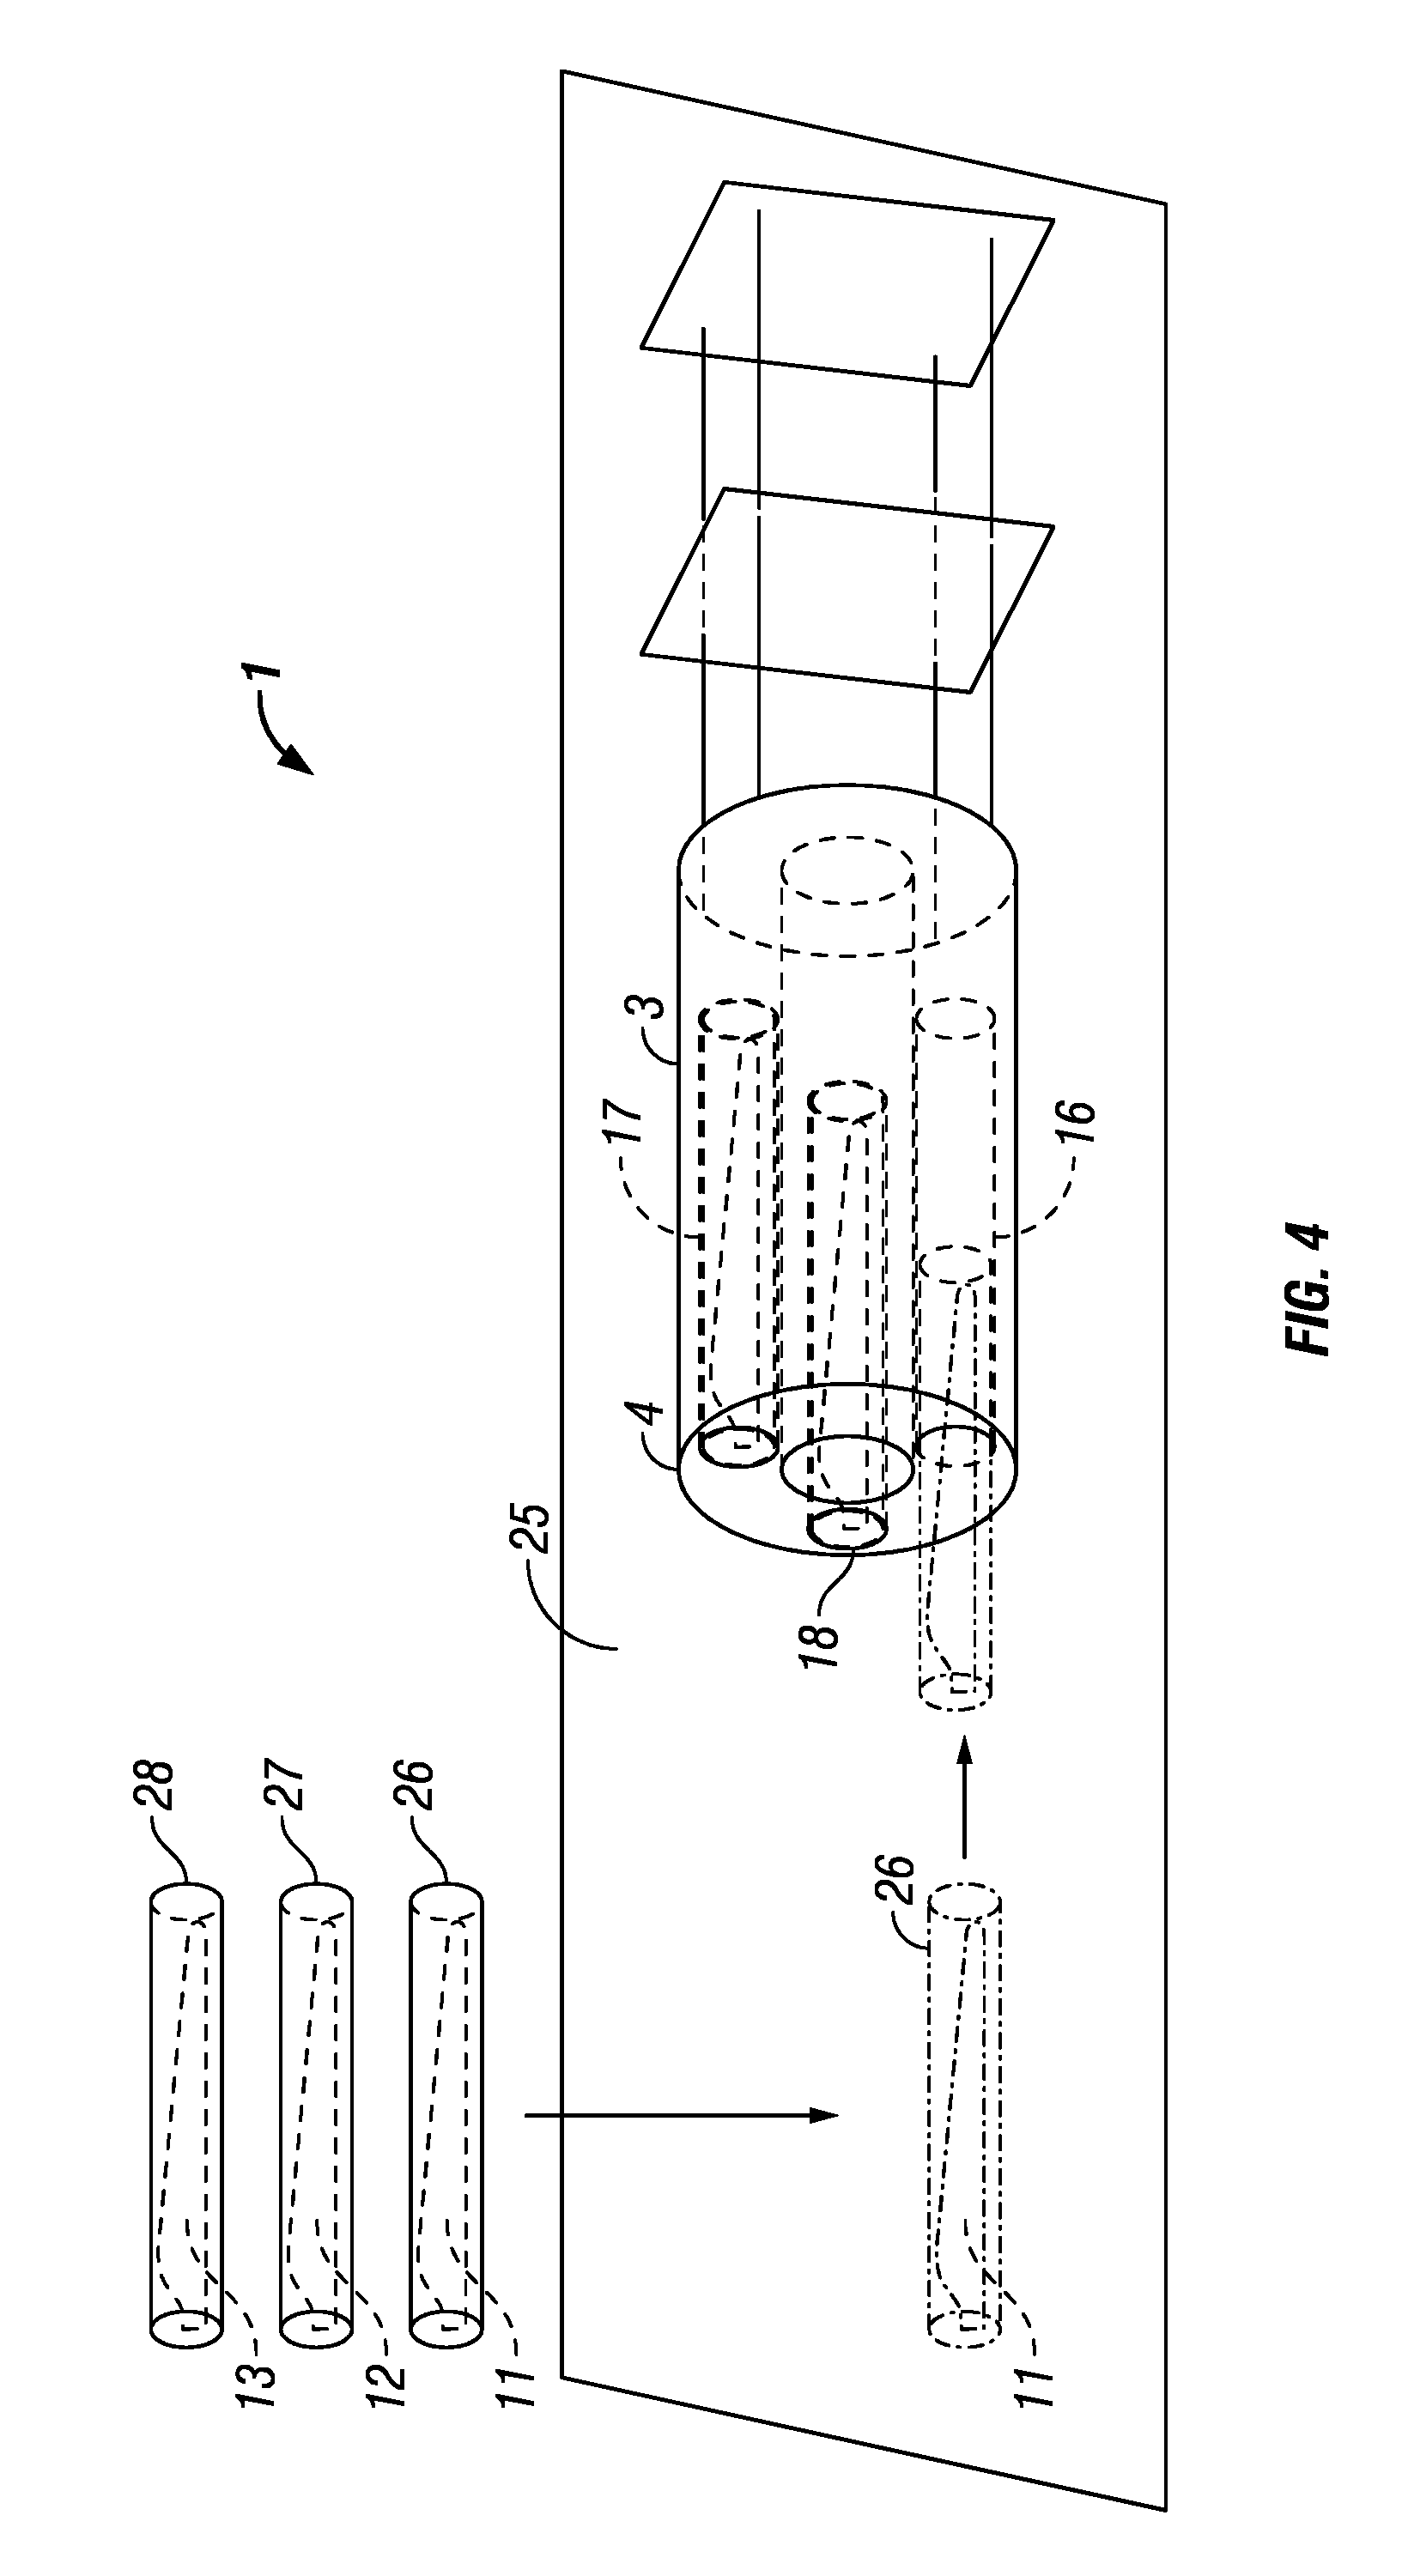 Offshore wind turbine installation system and method